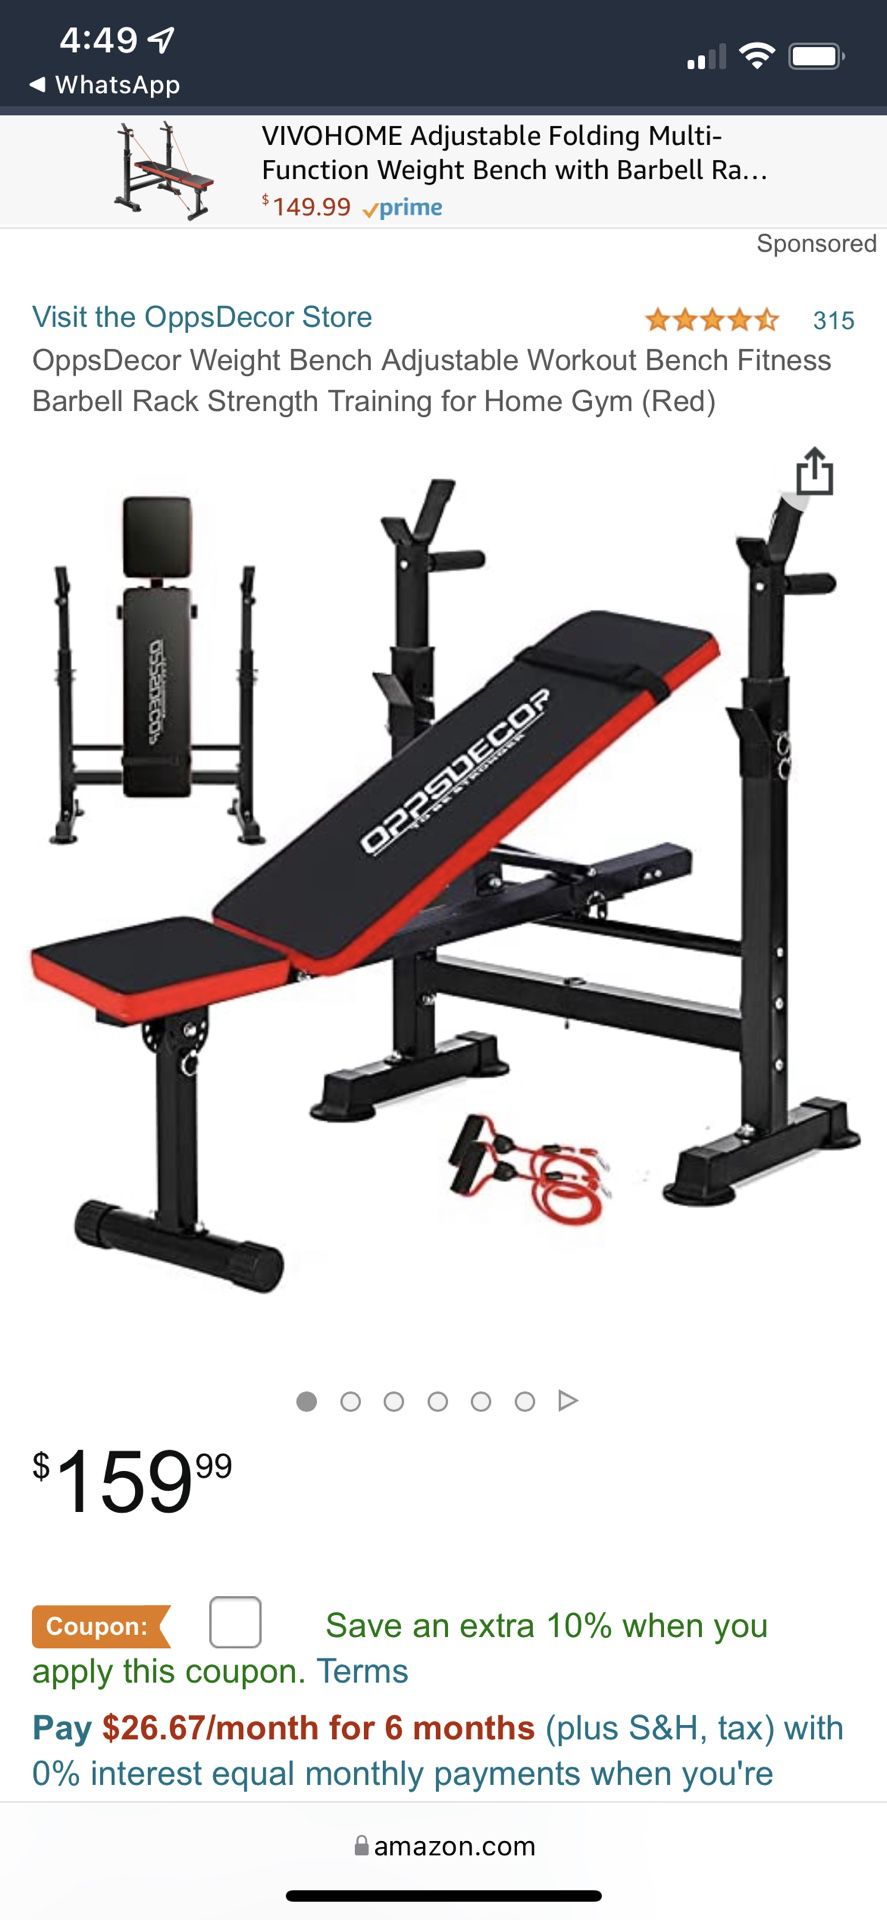 Workout Bench for Home Gym (Red)